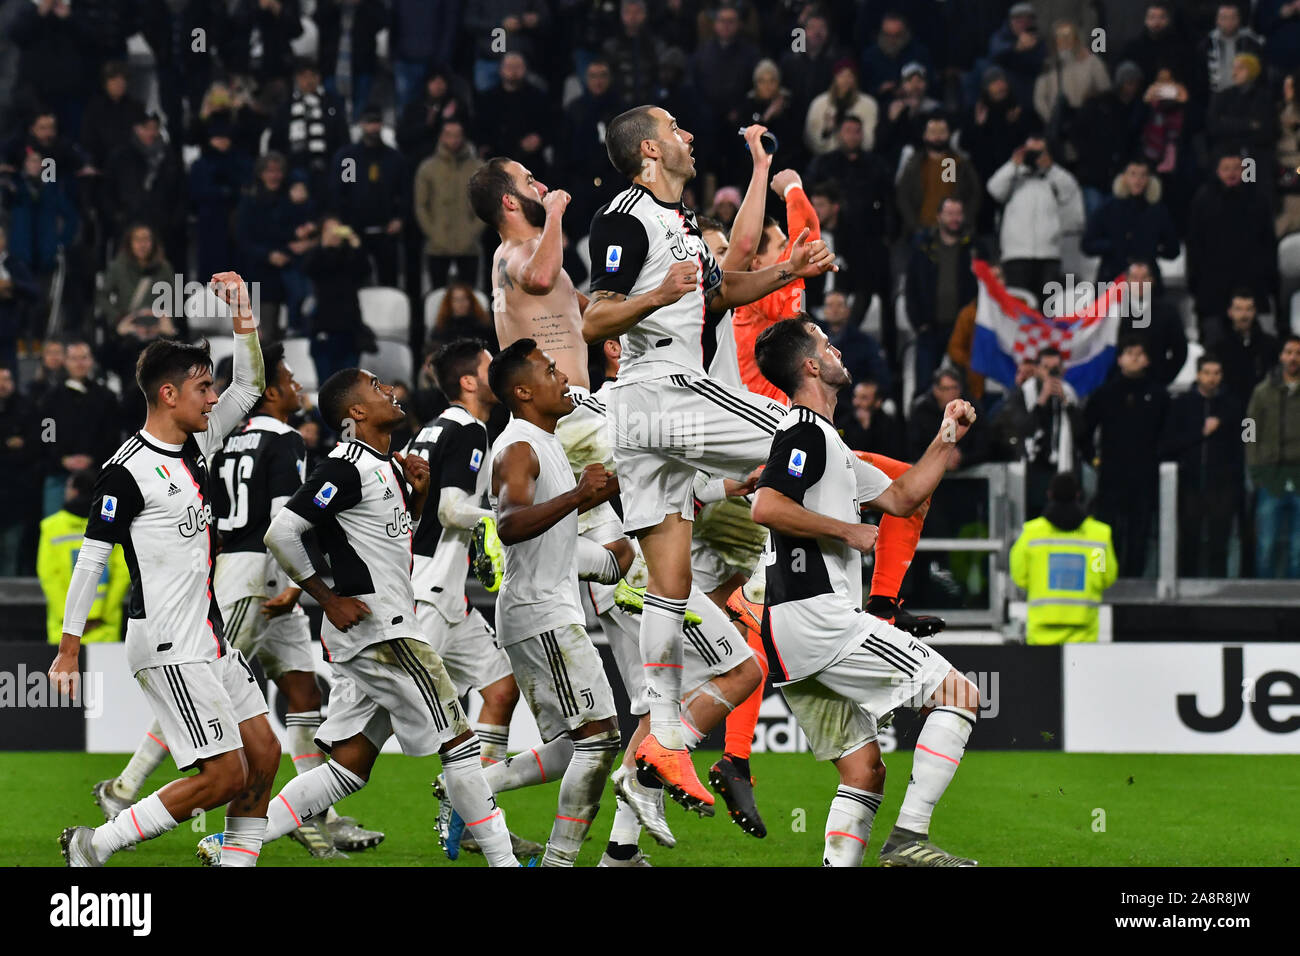 during the Serie A football match between Juventus FC and AC Milan at Allianz Stadium on 10th November, 2019 in Turin, Italy. Stock Photo